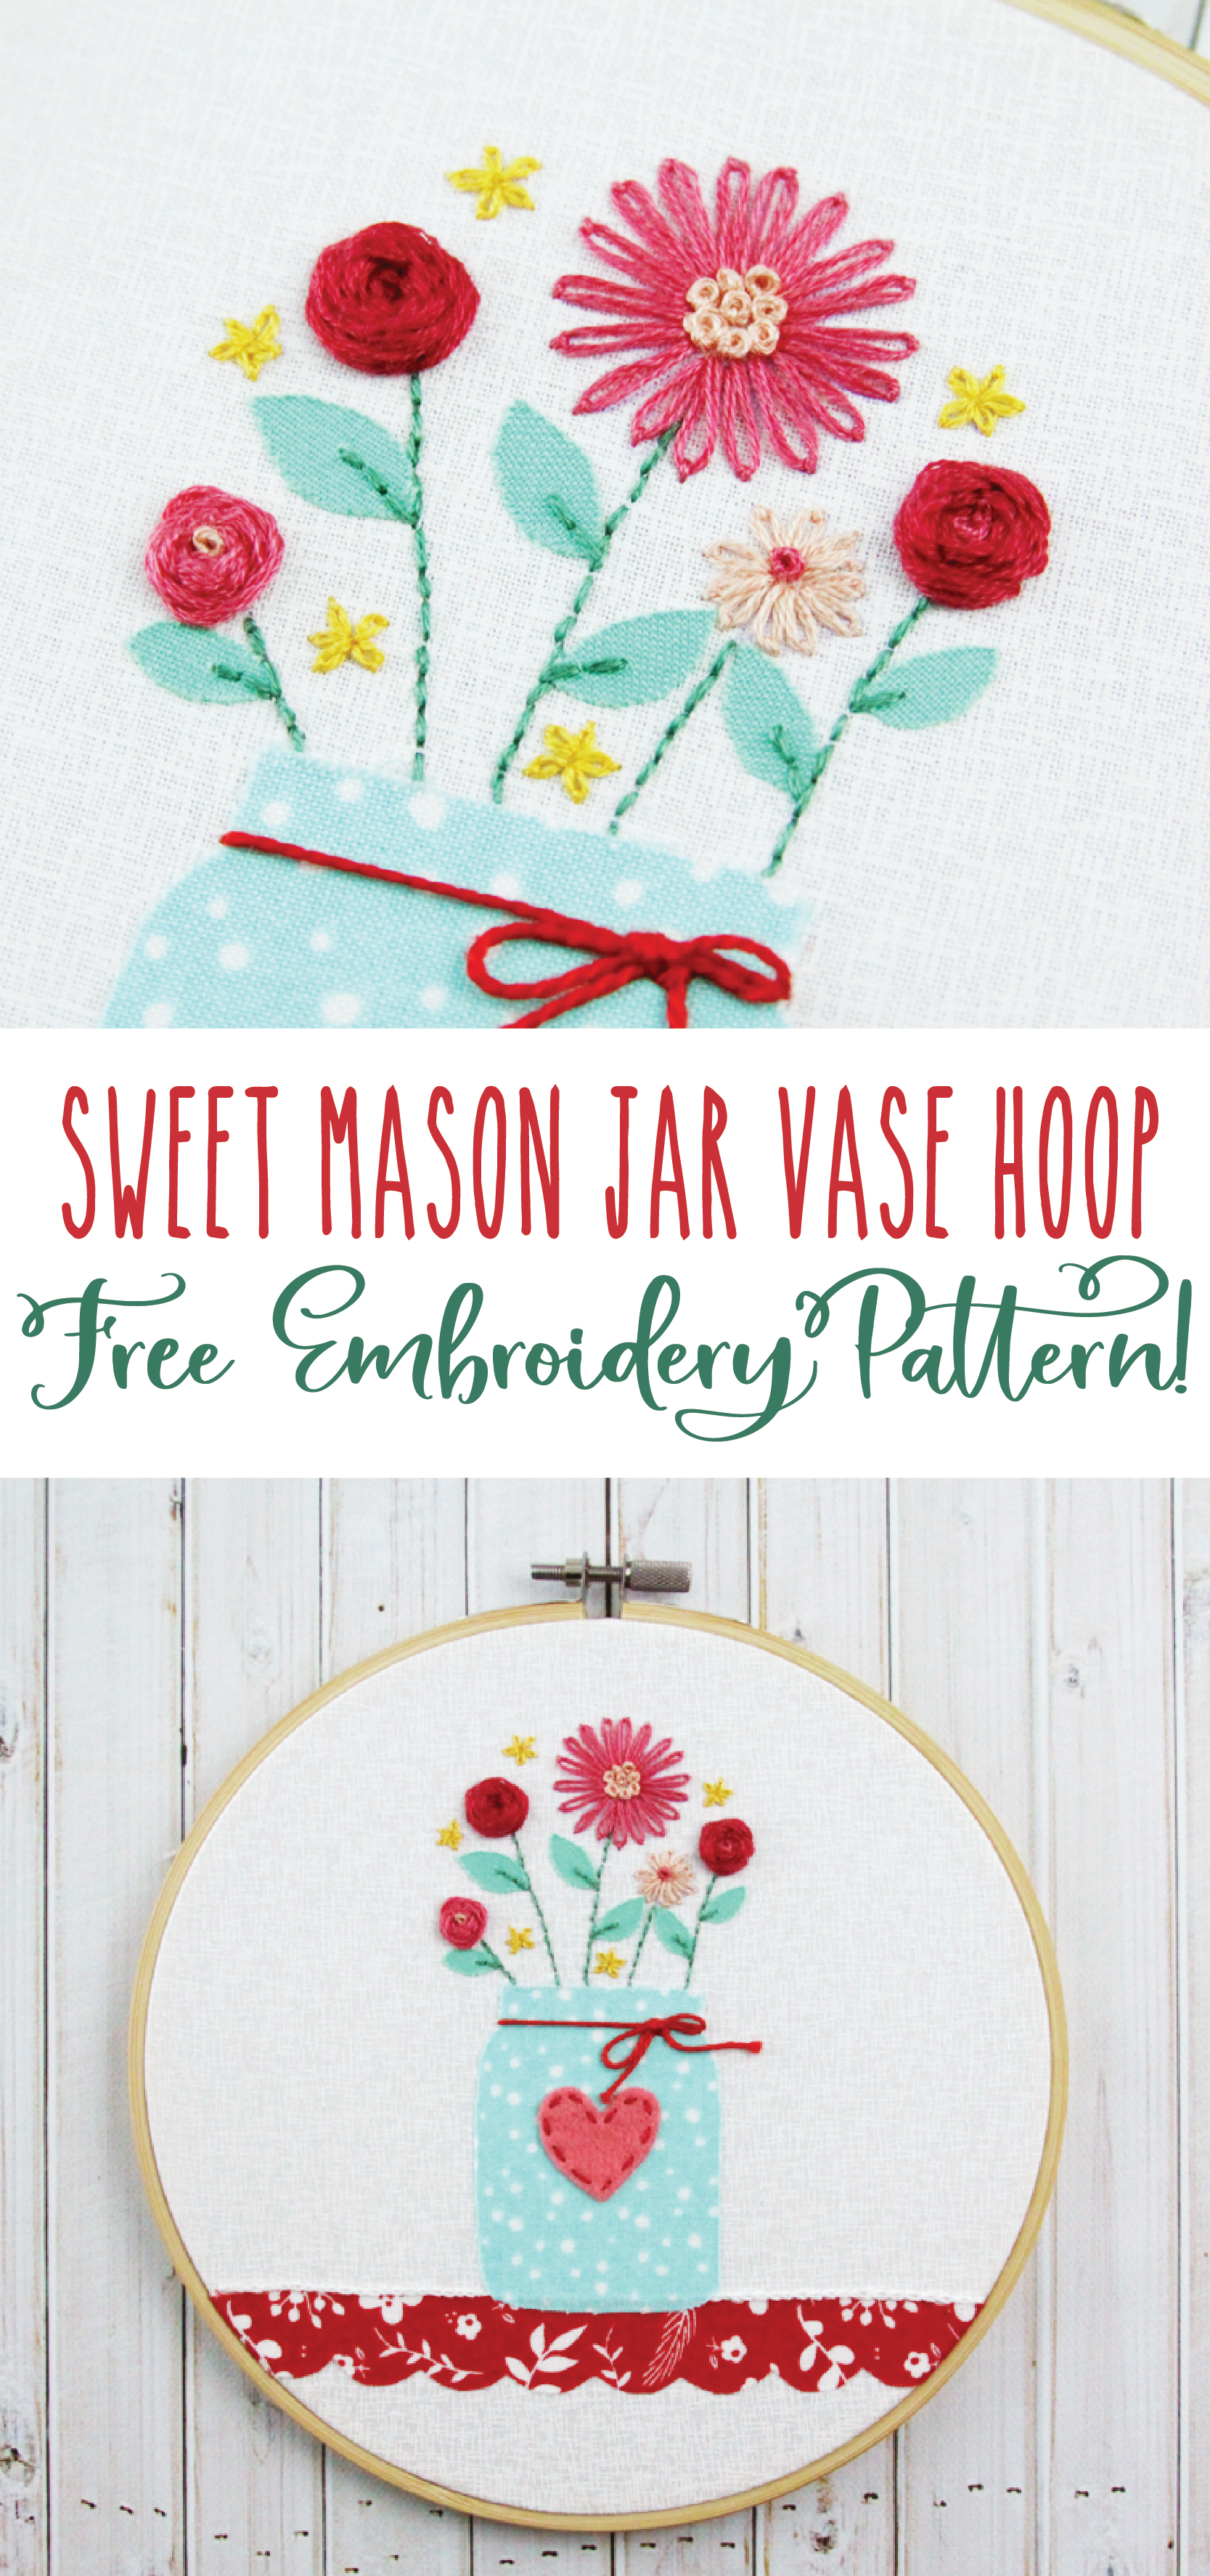 Make Your Own Embroidery Pattern Sweet Mason Jar Vase Hoop Free Embroidery Pattern